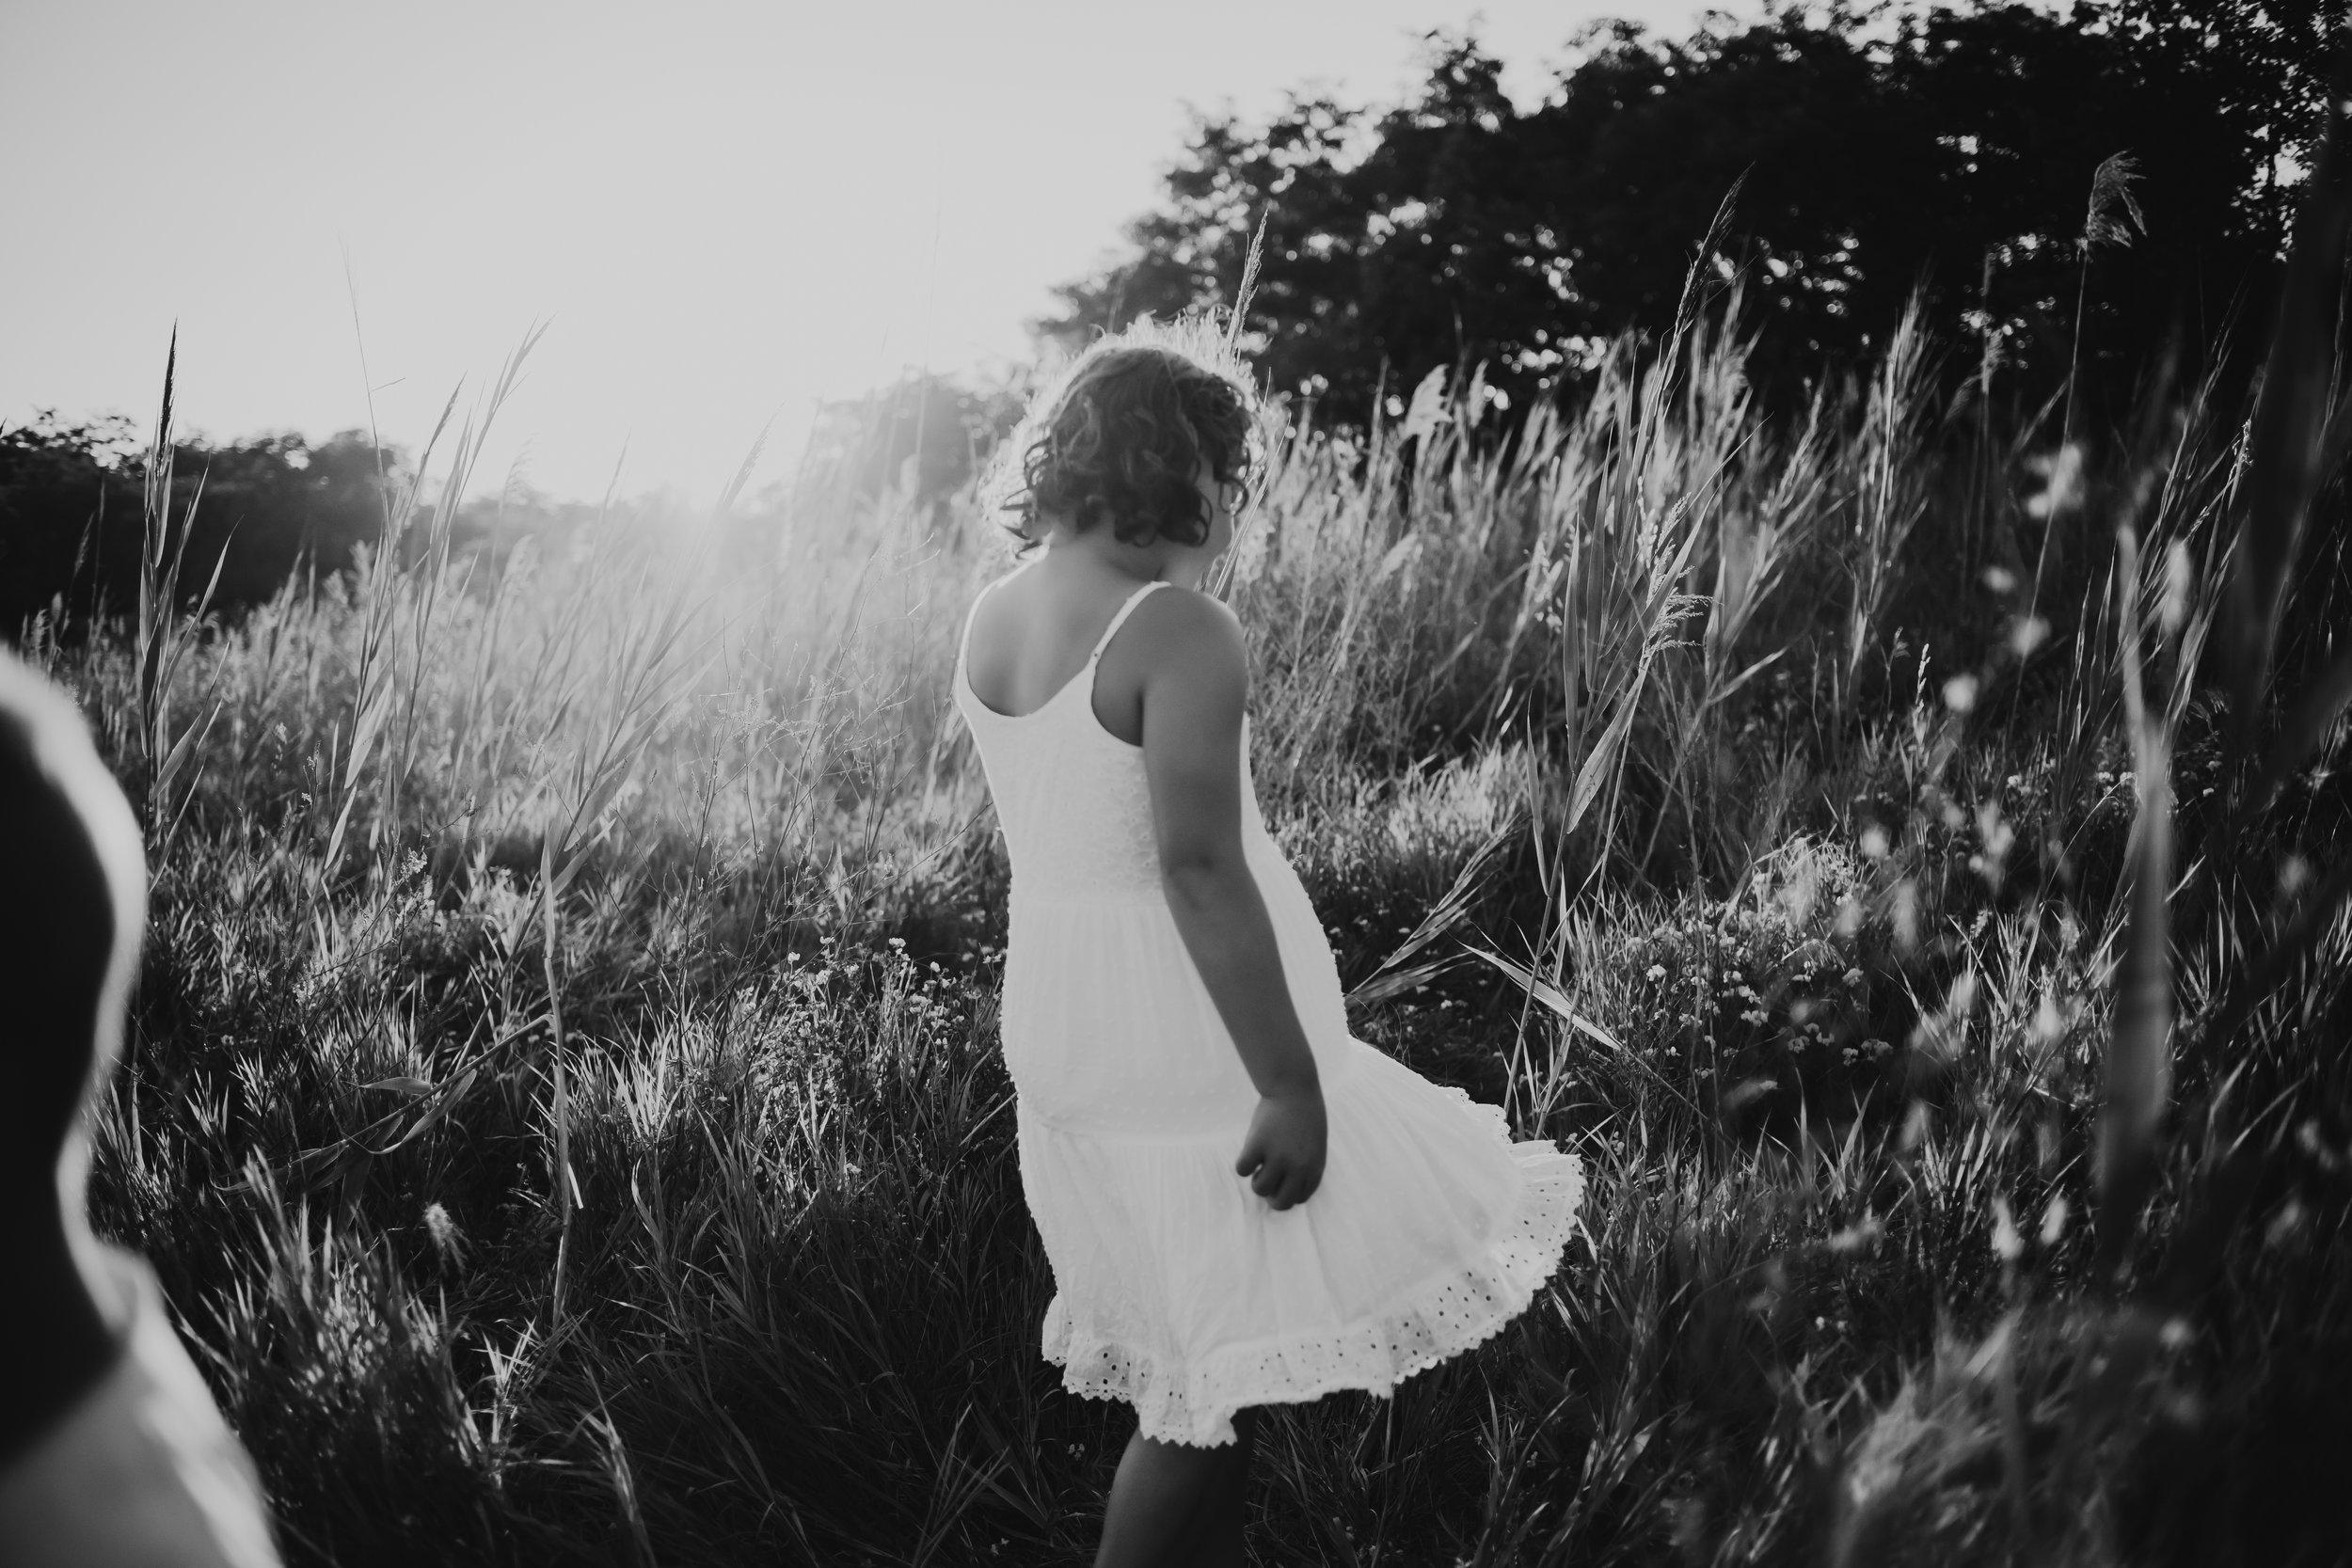  A little girl dances in green grass in the Illinois Valley by Teala Ward Photography. black and white portraits #motherhood #mommapics #TealaWardPhotography #TealaWardFamilies #IllinoisPhotographers #IllinoisFamilyPhotography 